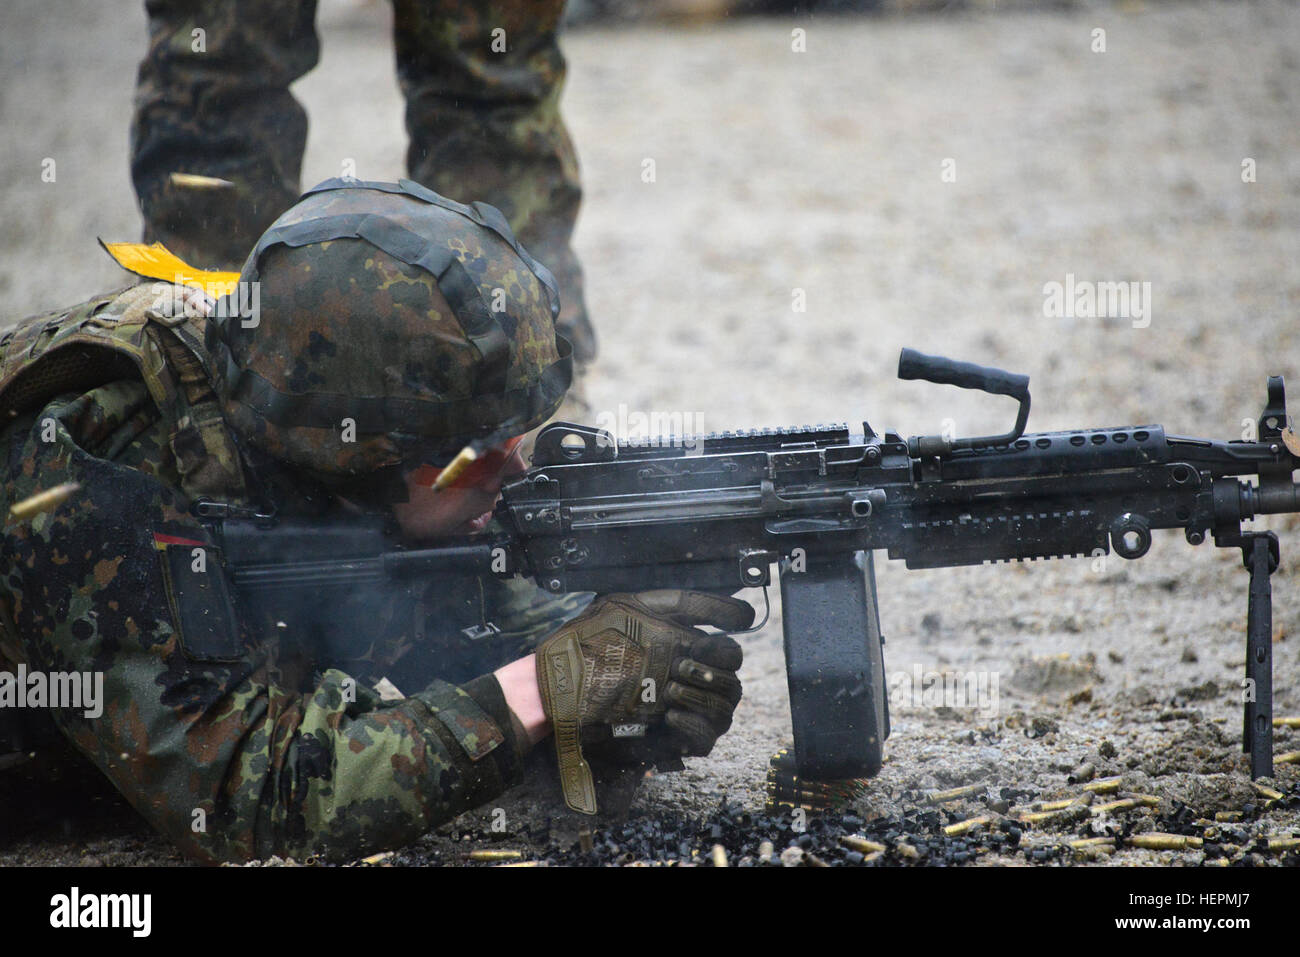 A German soldier fires a M249 light machine gun during a familiarization training on U.S. weapons at the 7th Army Joint Multinational Training Command Grafenwoehr Training Area, Germany, Dec. 9, 2015. (U.S. Army photo by Visual Information Specialist Gertrud Zach/released) CATC trains German soldiers on US weapons 151209-A-HE539-0831 Stock Photo